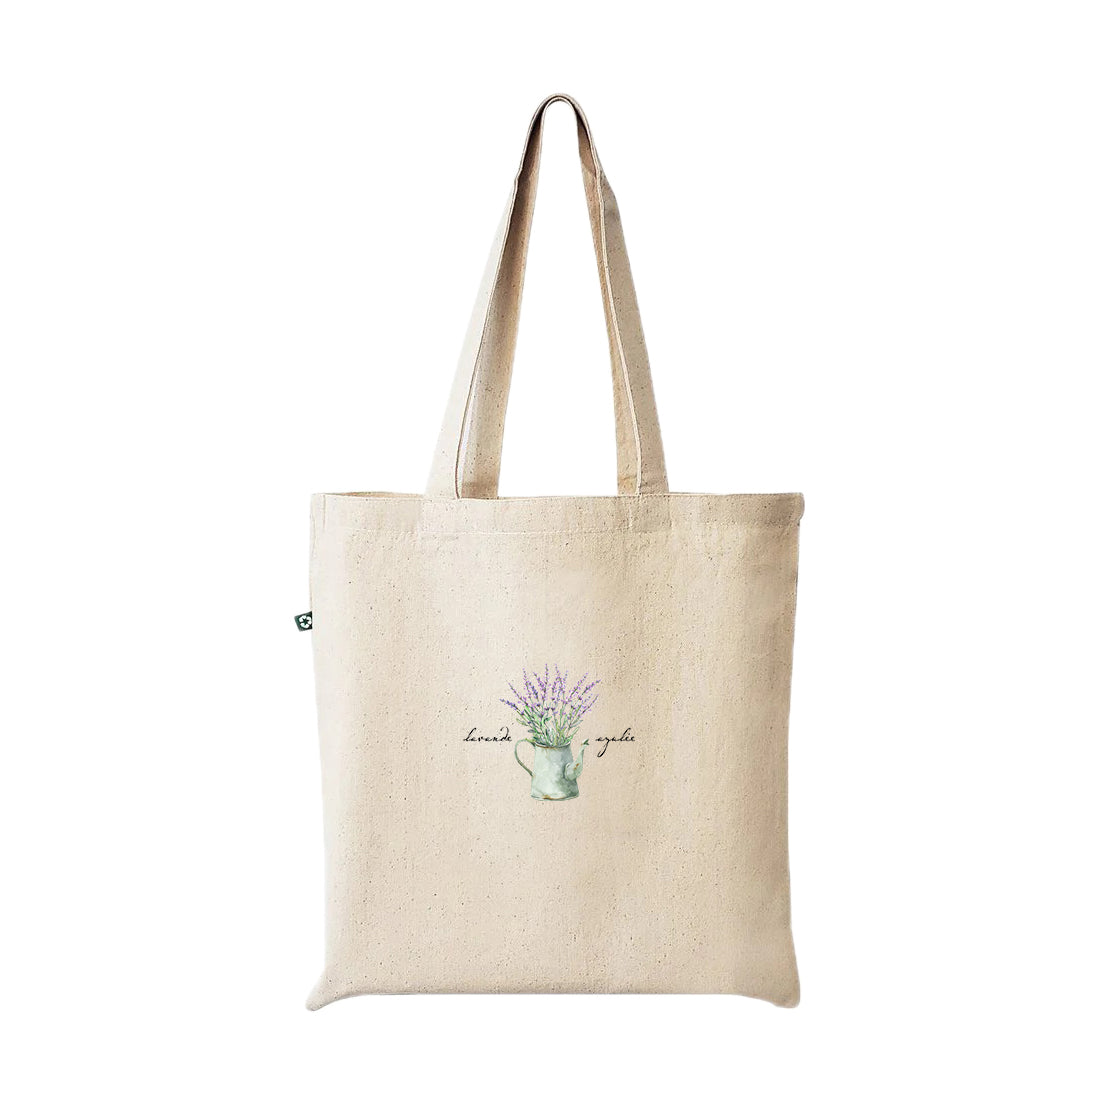 Azulée Recycled Cotton Tote Bag